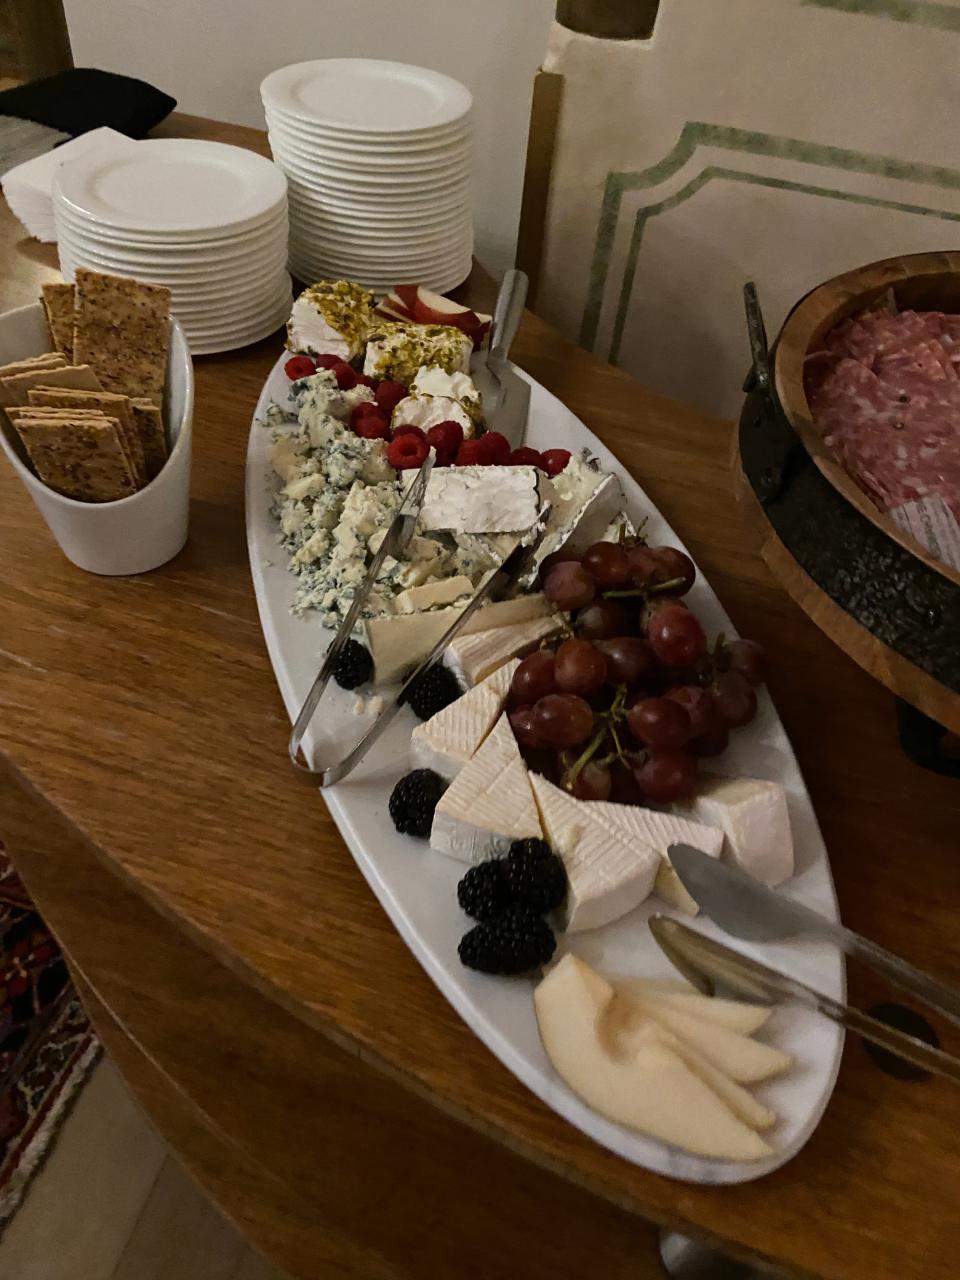 A cheese charcuterie option at the new Wine Grotto at Saint John's Resort in Plymouth Township.